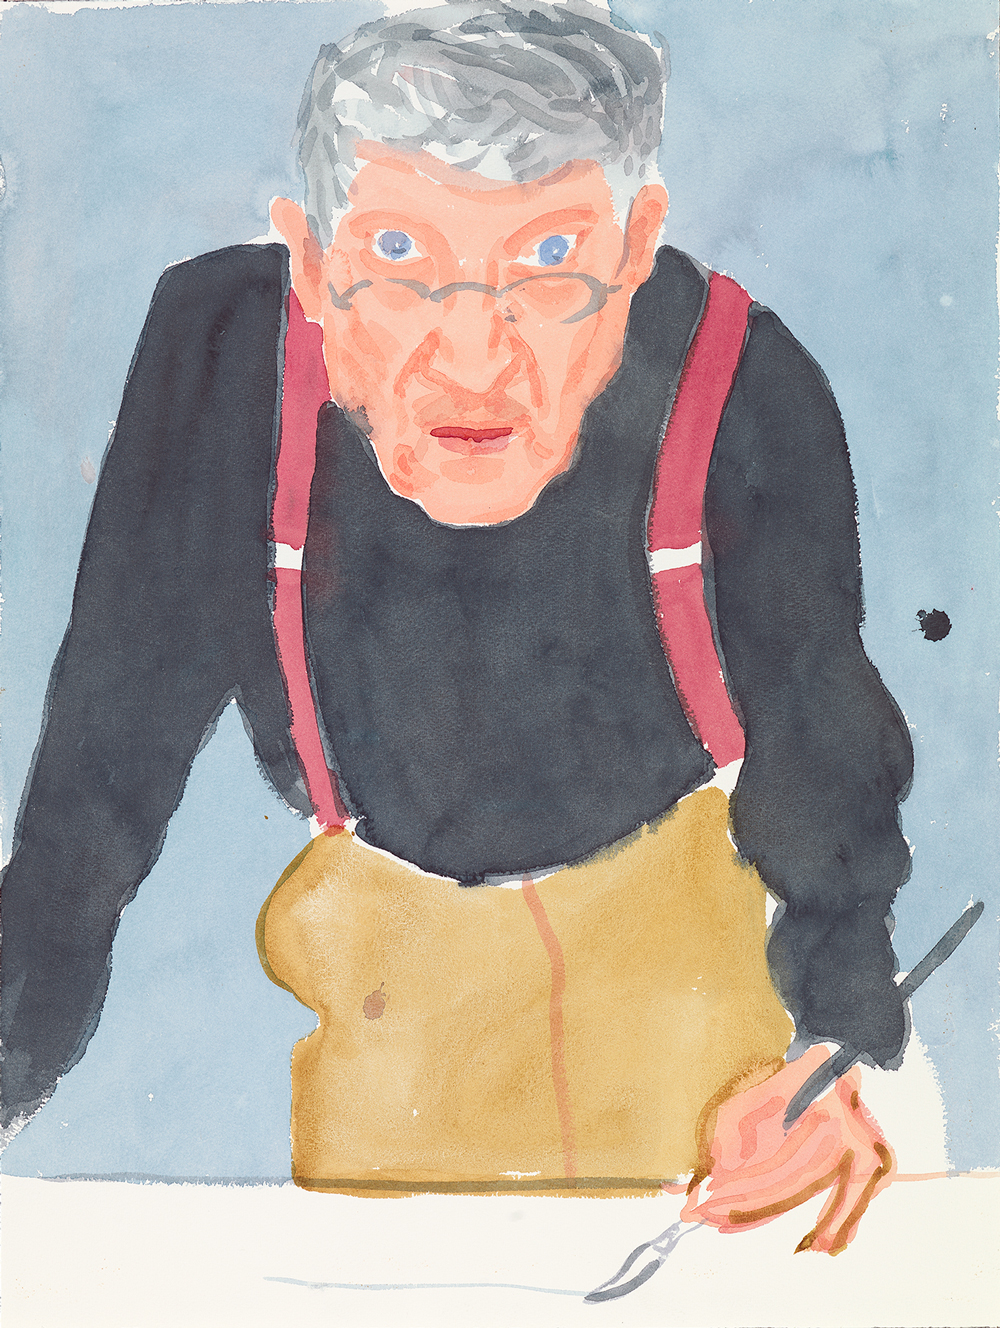 Watercolor self-portrait of David Hockney, paintbrush in hand, looking at the viewer.